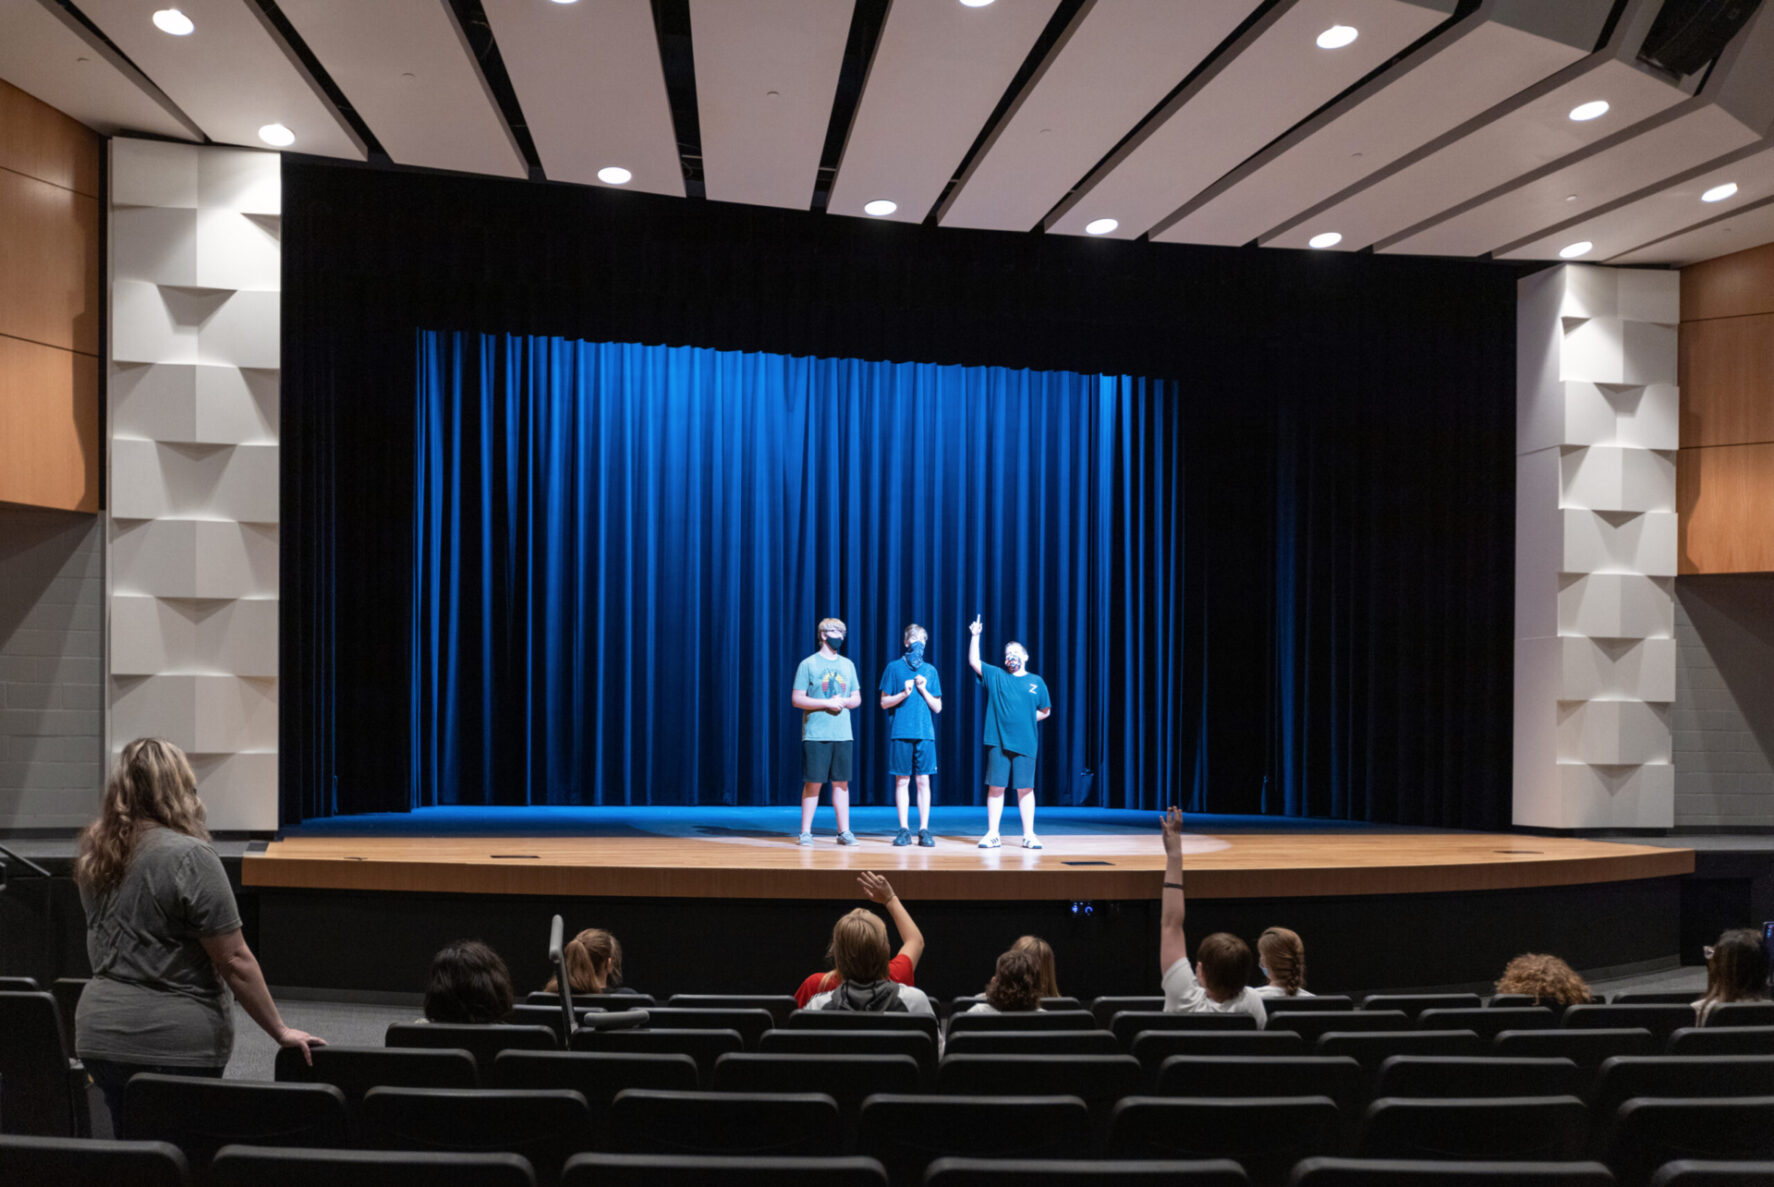 Students on stage at the Performing Arts Center at Basehor Linwood Middle School, built by McCownGordon.